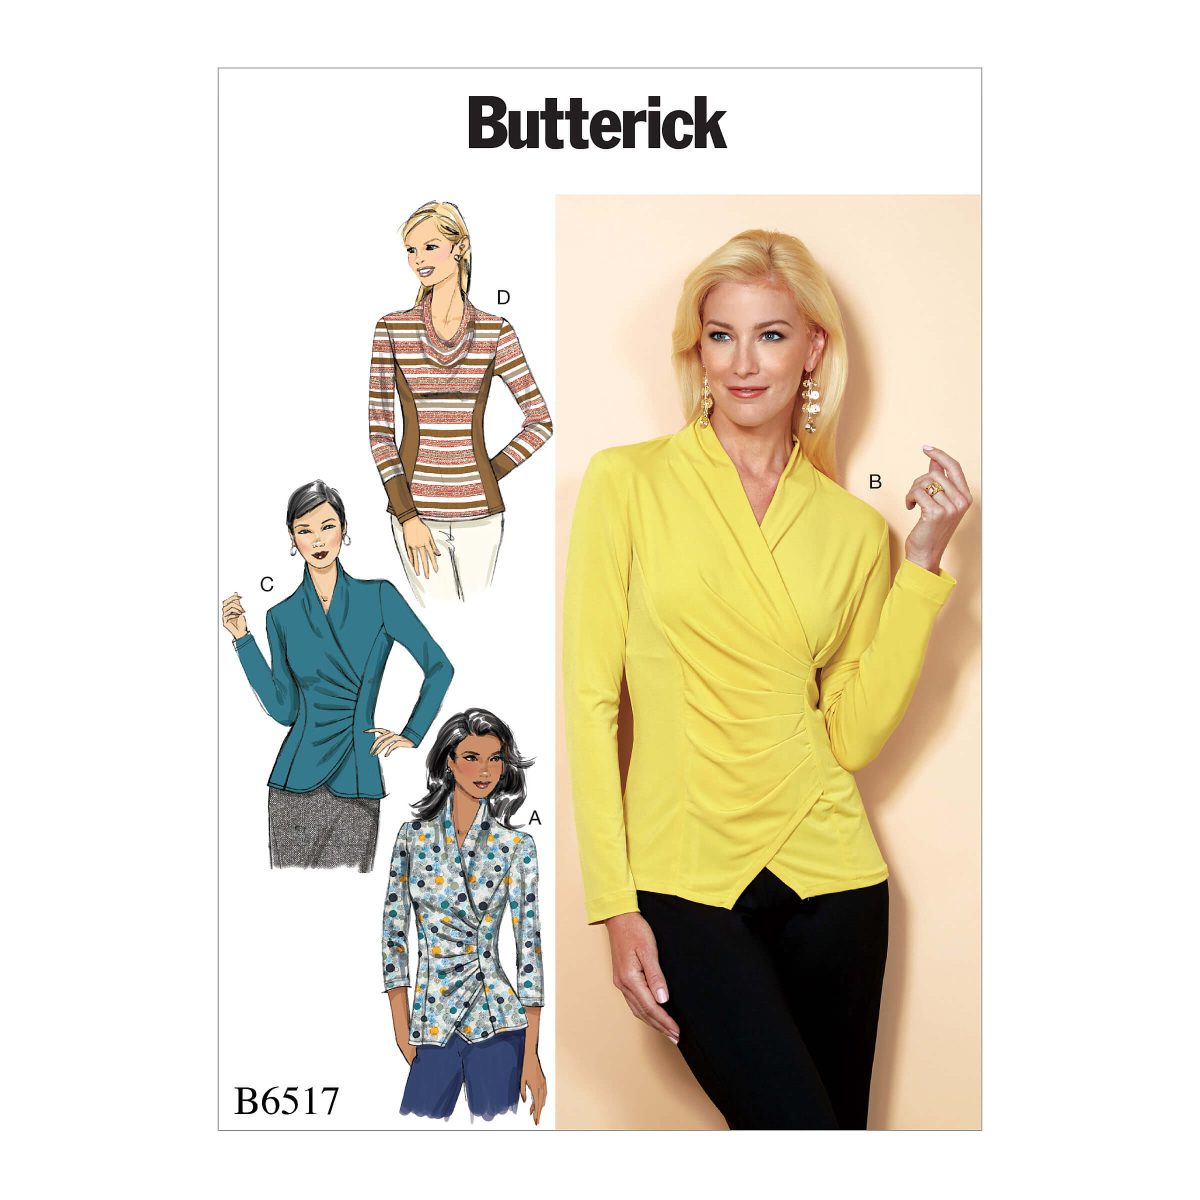 Butterick Sewing Pattern B6517 Misses' Top with Pleat and Options